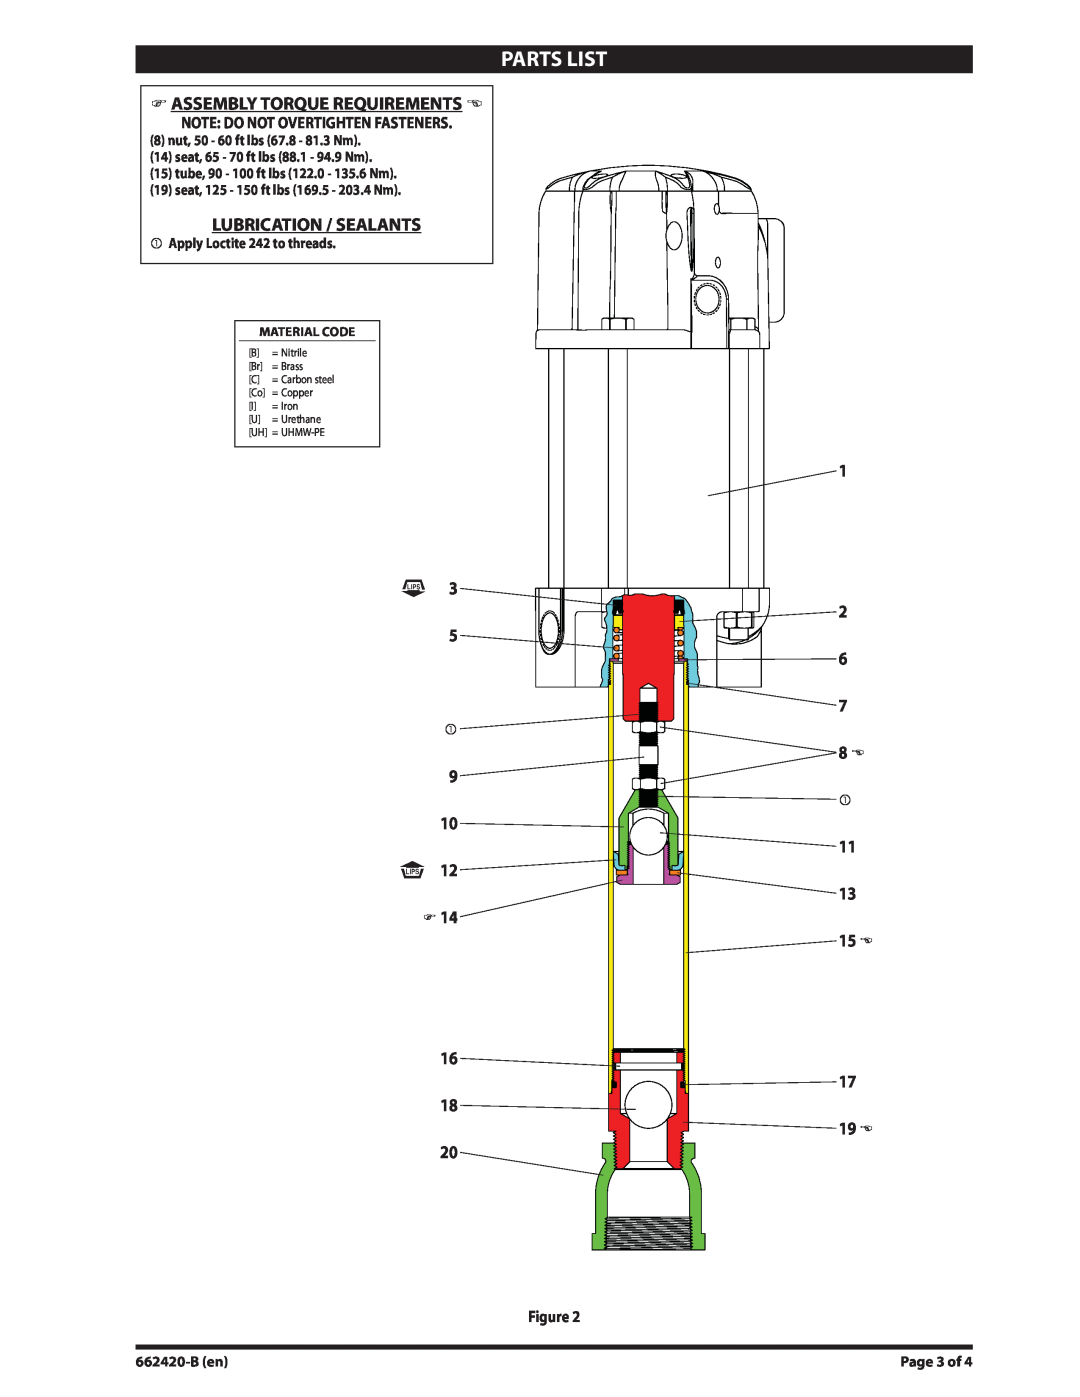 Ingersoll-Rand 662420-B Assembly Torque Requirements, Lubrication / Sealants, Note Do Not Overtighten Fasteners, Page 3 of 